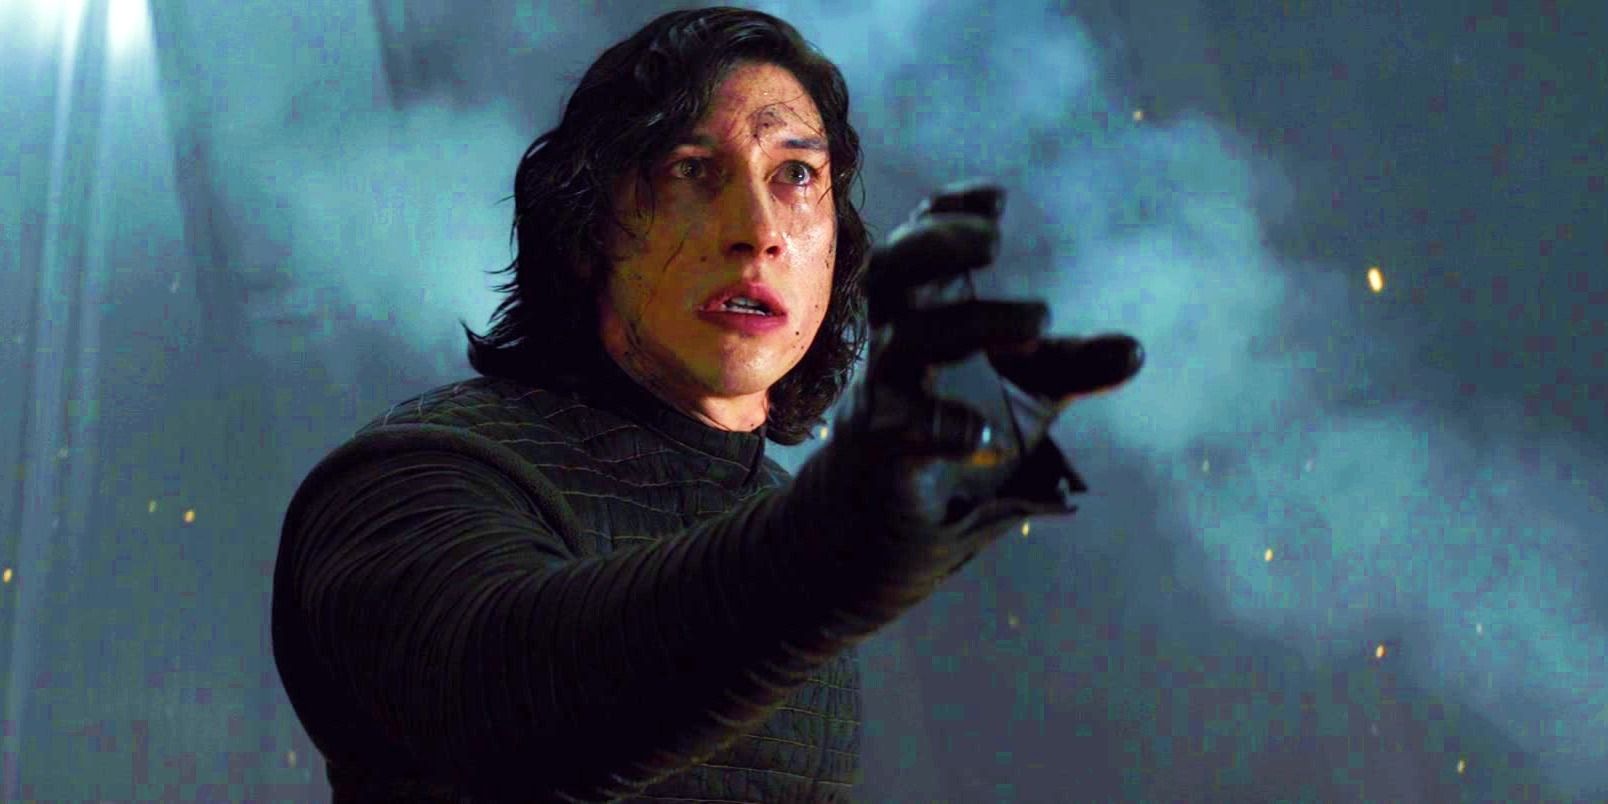 Kylo Ren reaching out and Force choking someone off screen in The Last Jedi